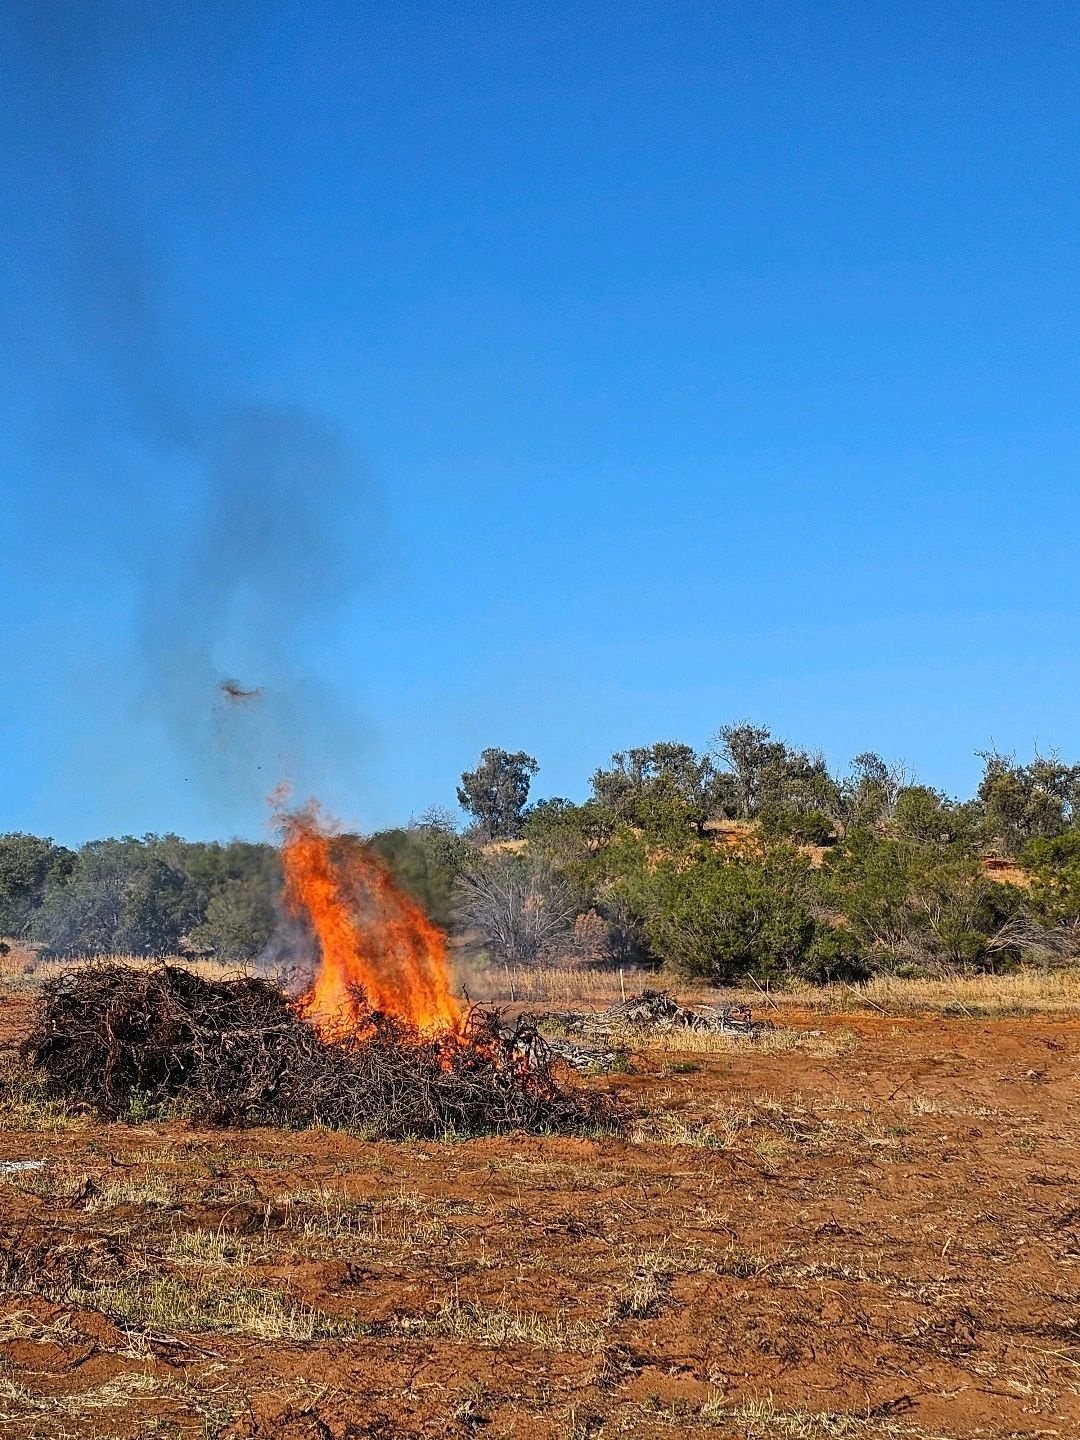 Vines ripped from the barren soil of grape grower Tony Townsend’s vineyard in South Australia are burned. Around the world winemakers are cutting back on inventories, and ripping up vines and replacing them because wine production is no longer profitable. Photo: Tony Townsend